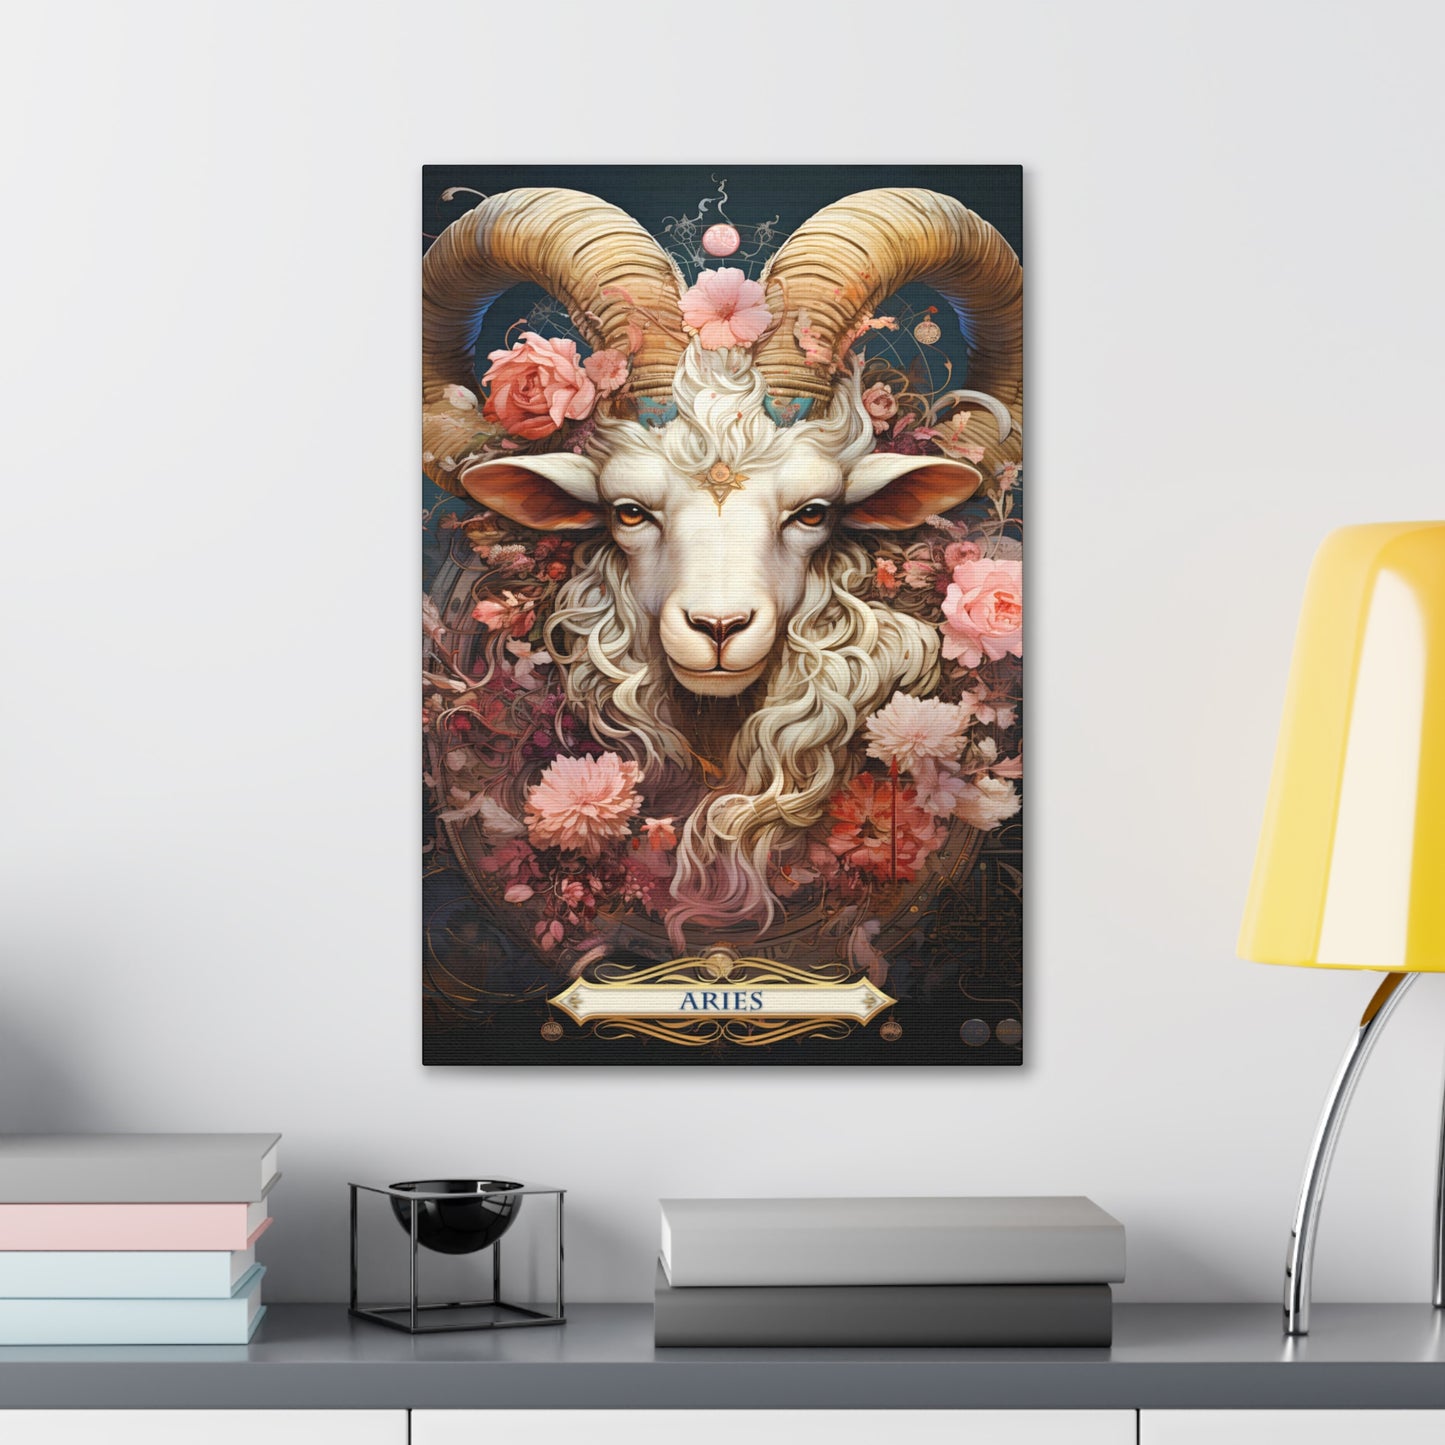 Cotton Canvas wall art print of a Aries Zodiac image with a floral design element. A modern take of an elegant astrological symbol